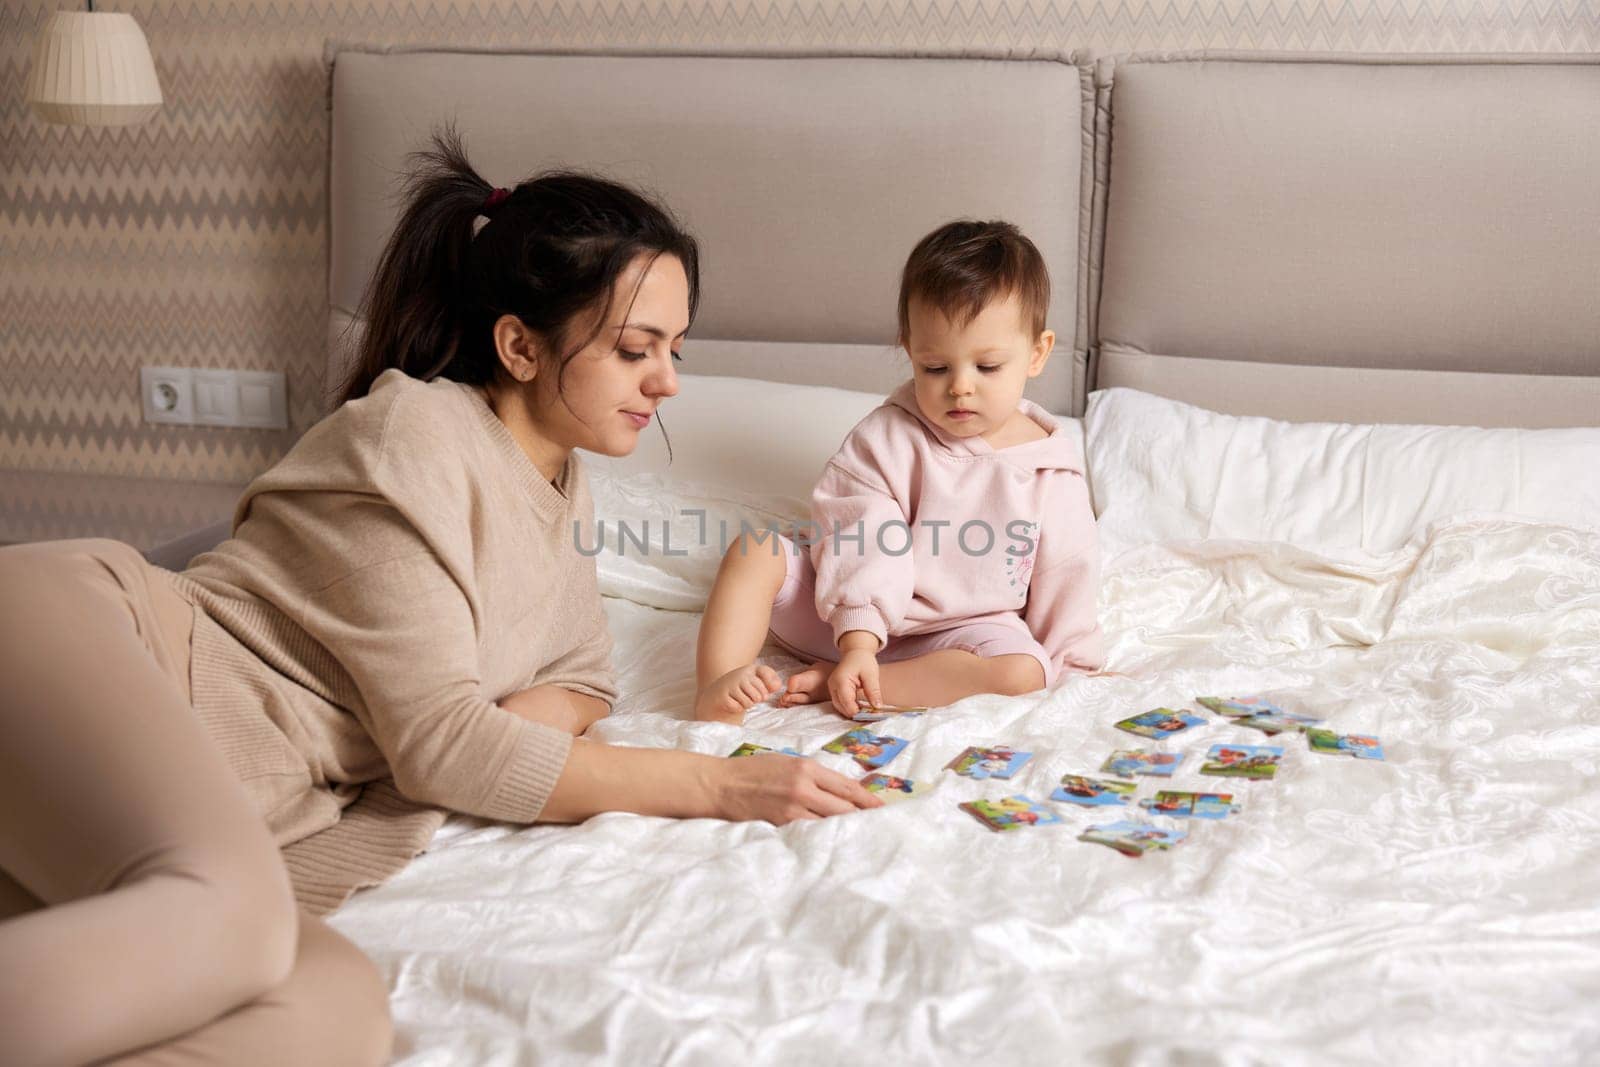 mother playing puzzle with her little child girl by erstudio